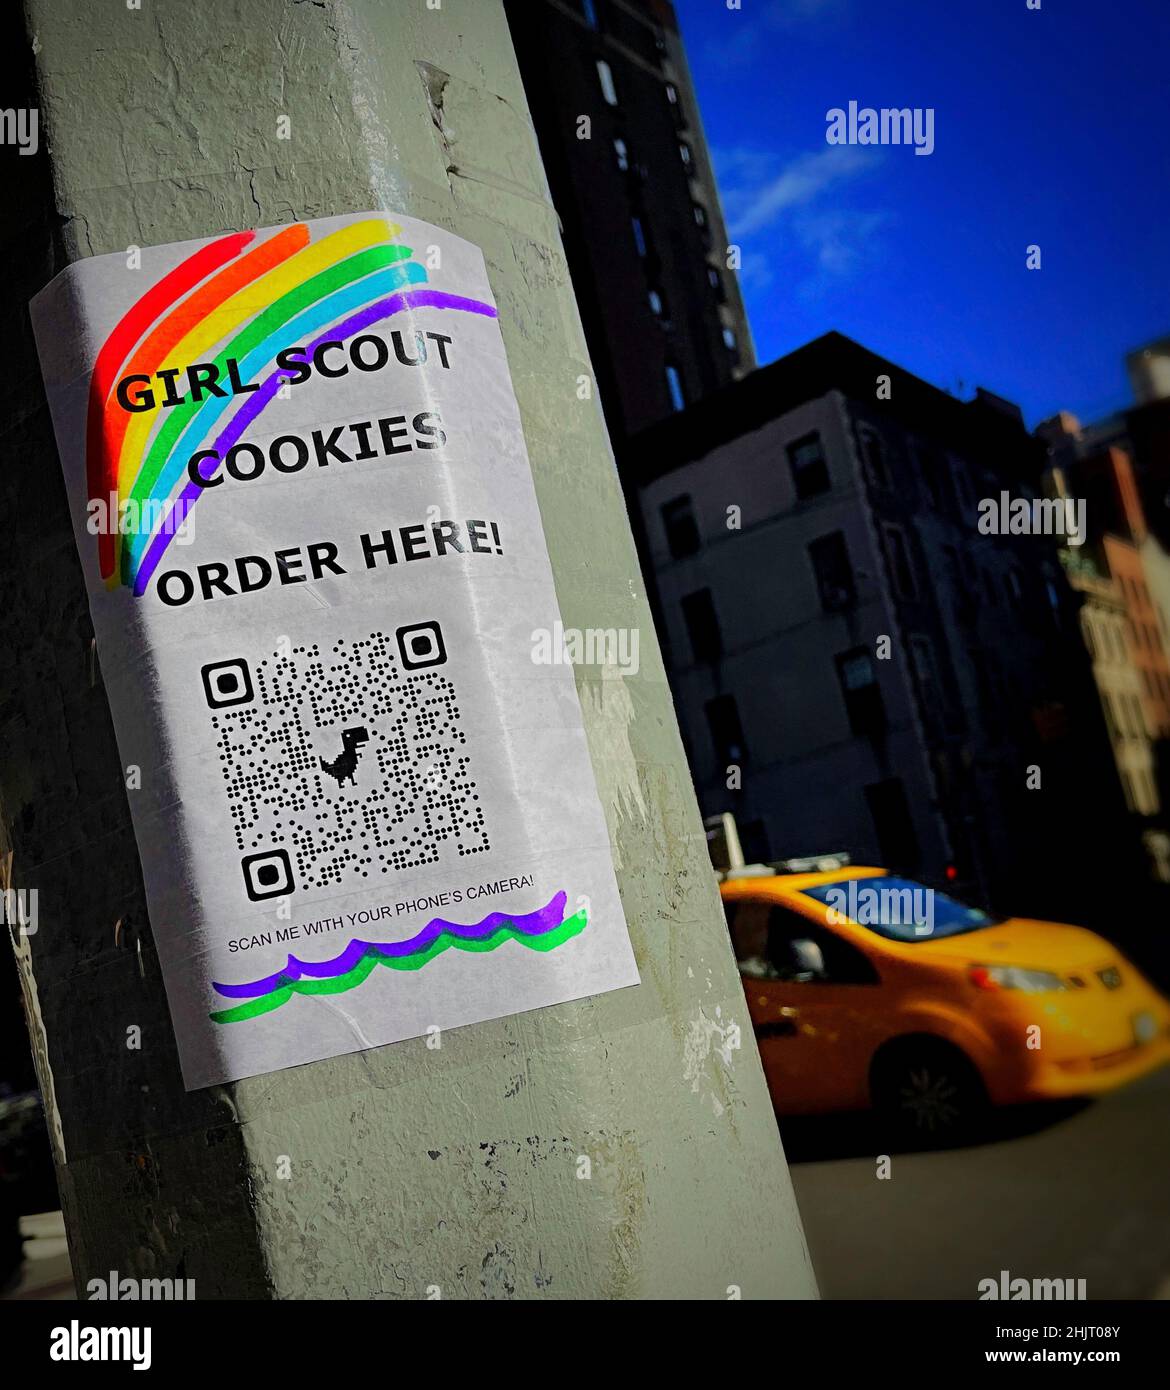 QR Code Oder Here Sign for Girl Scout Cookies, NYC, USA, 2022 Stock Photo